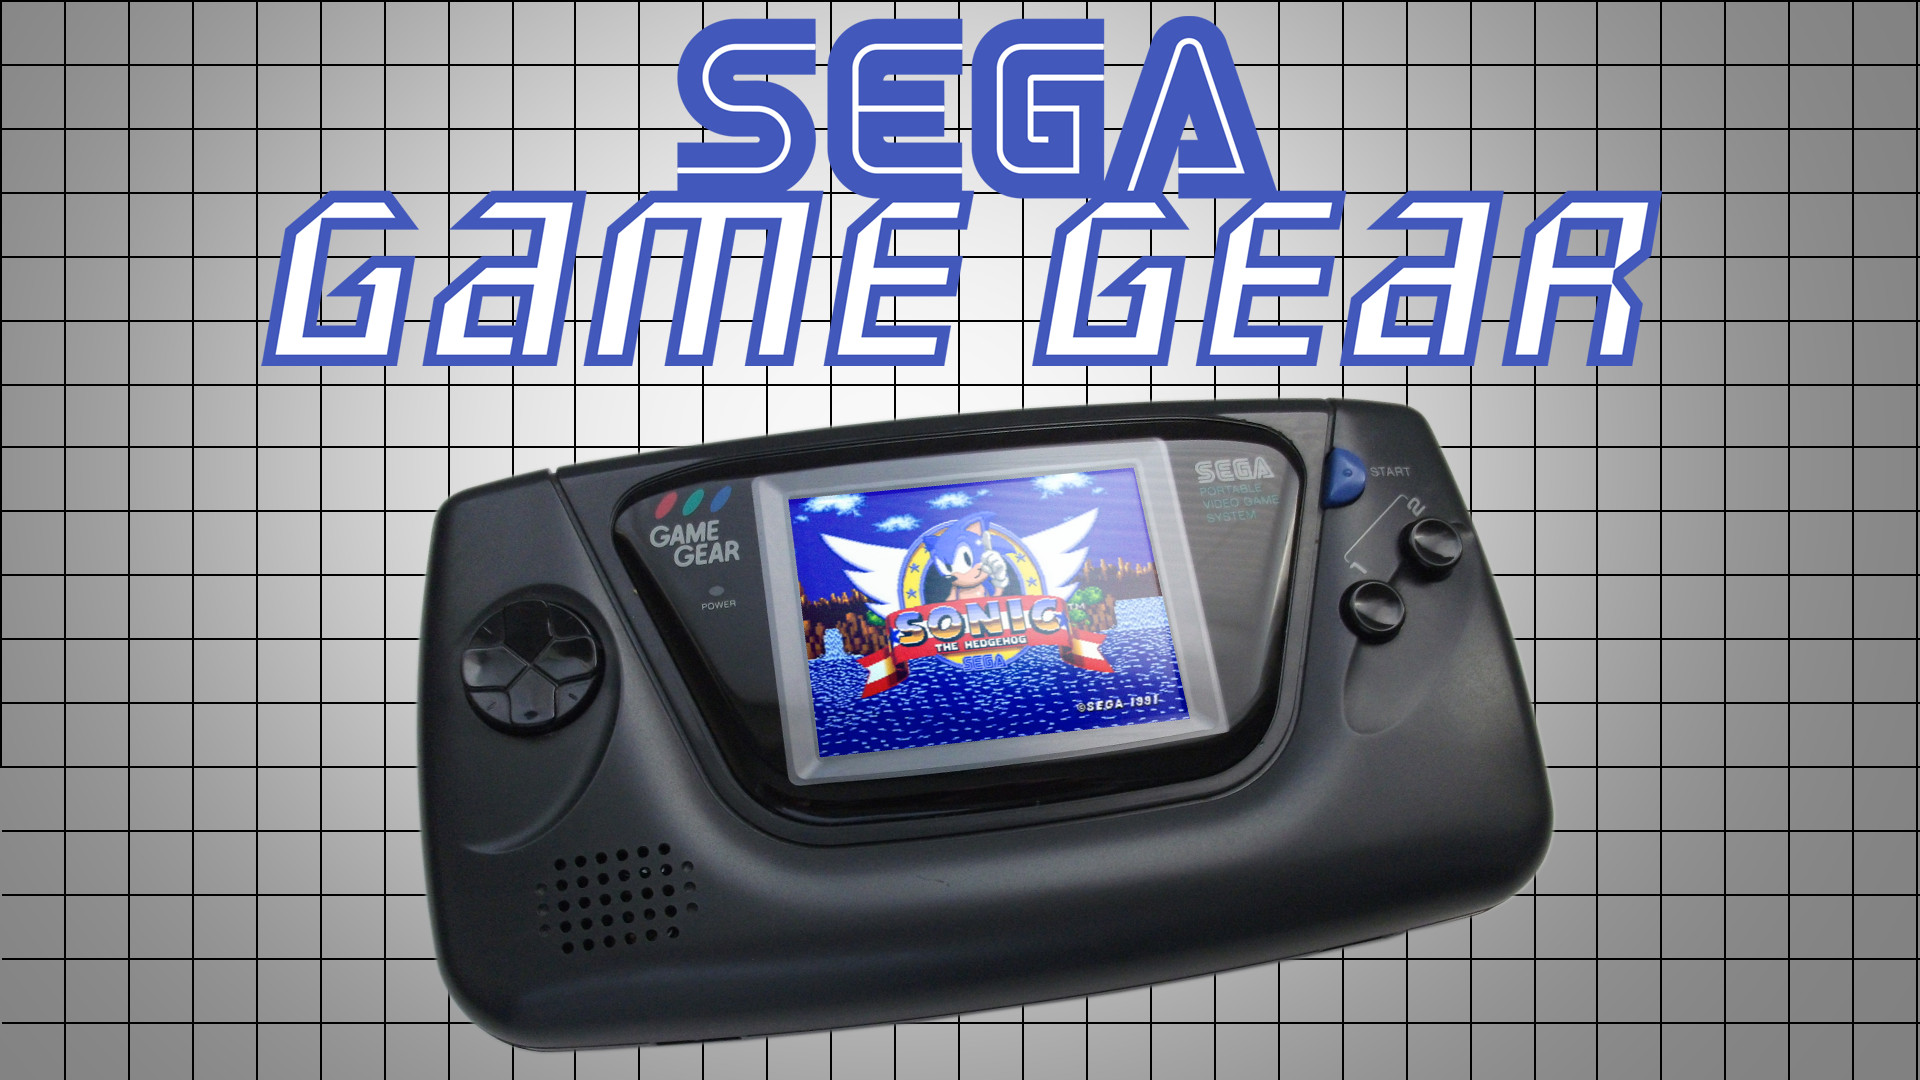 Sega Game Gear Roms Games And Isos To Download For Emulation